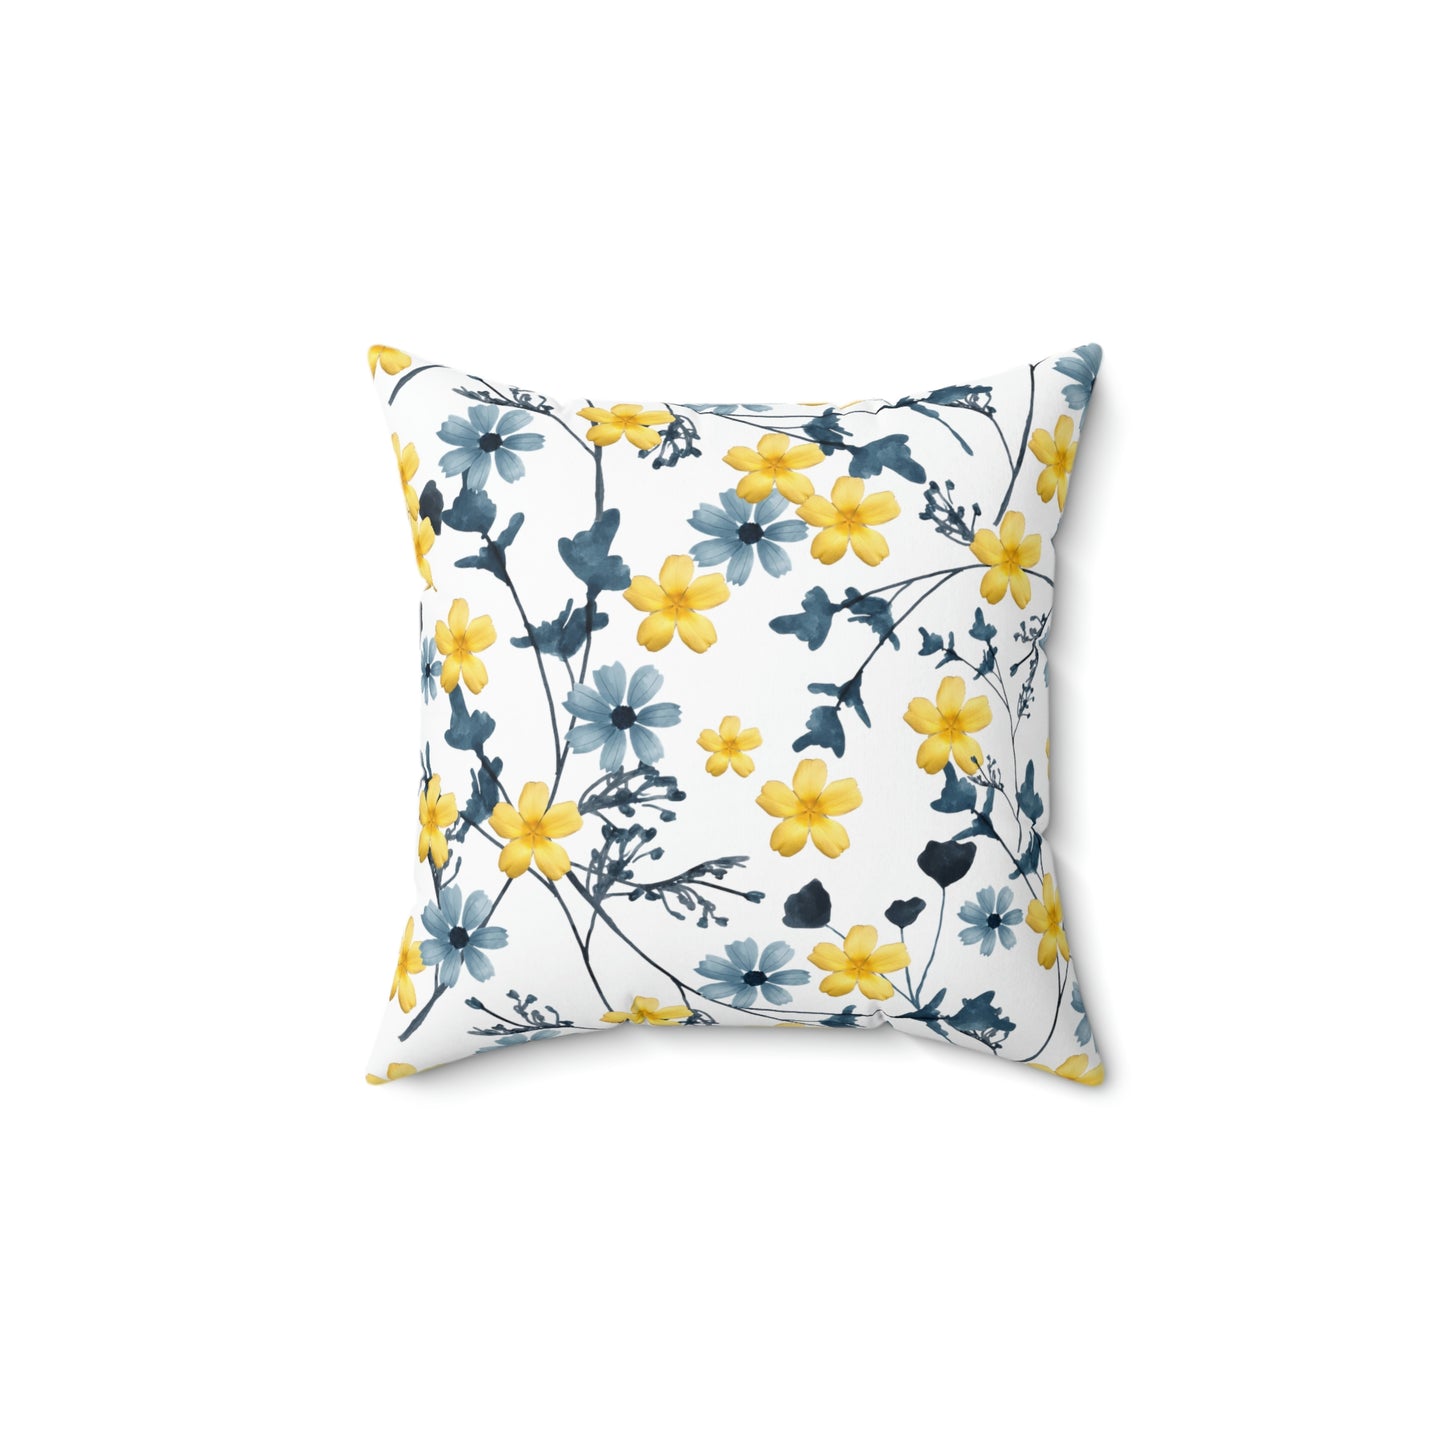 Spring Pillow, Yellow Pillow, Summer Cushion, Floral Pillow, Housewarming Gift, Blue Floral Cushion, Blue and Yellow Home Decor,